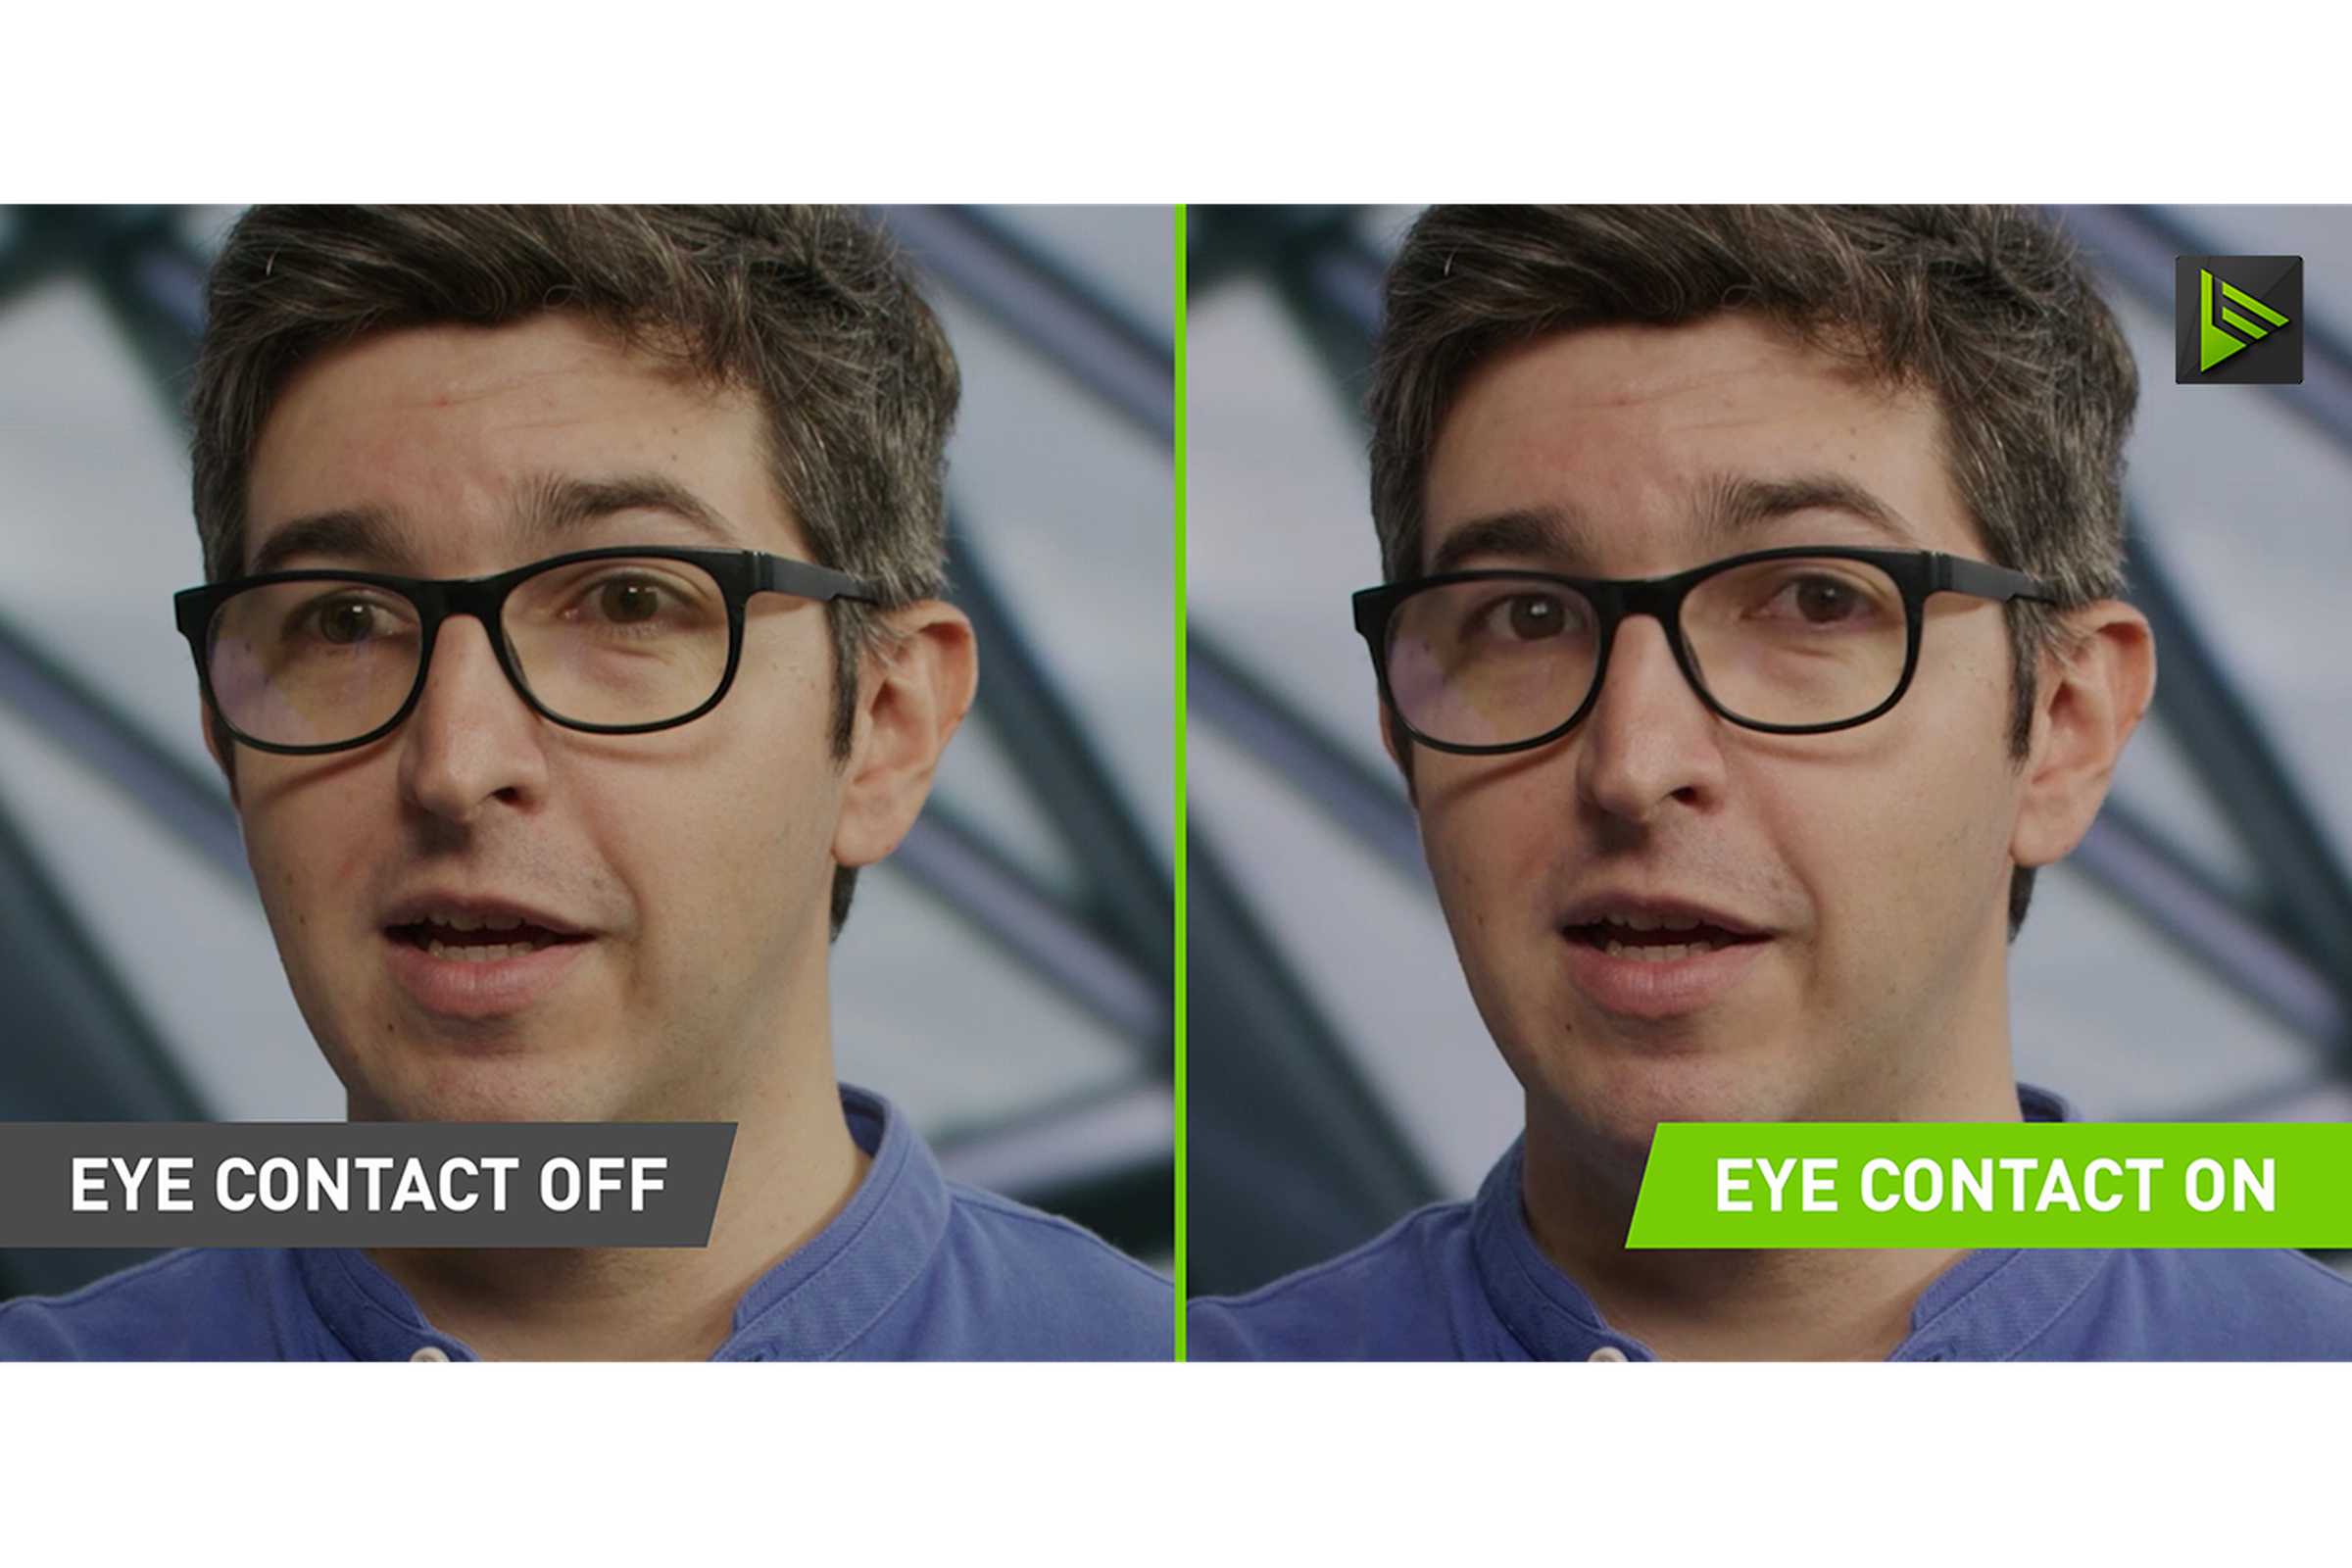 Nvidia Broadcast can now deepfake your eyes to make you look at the camera